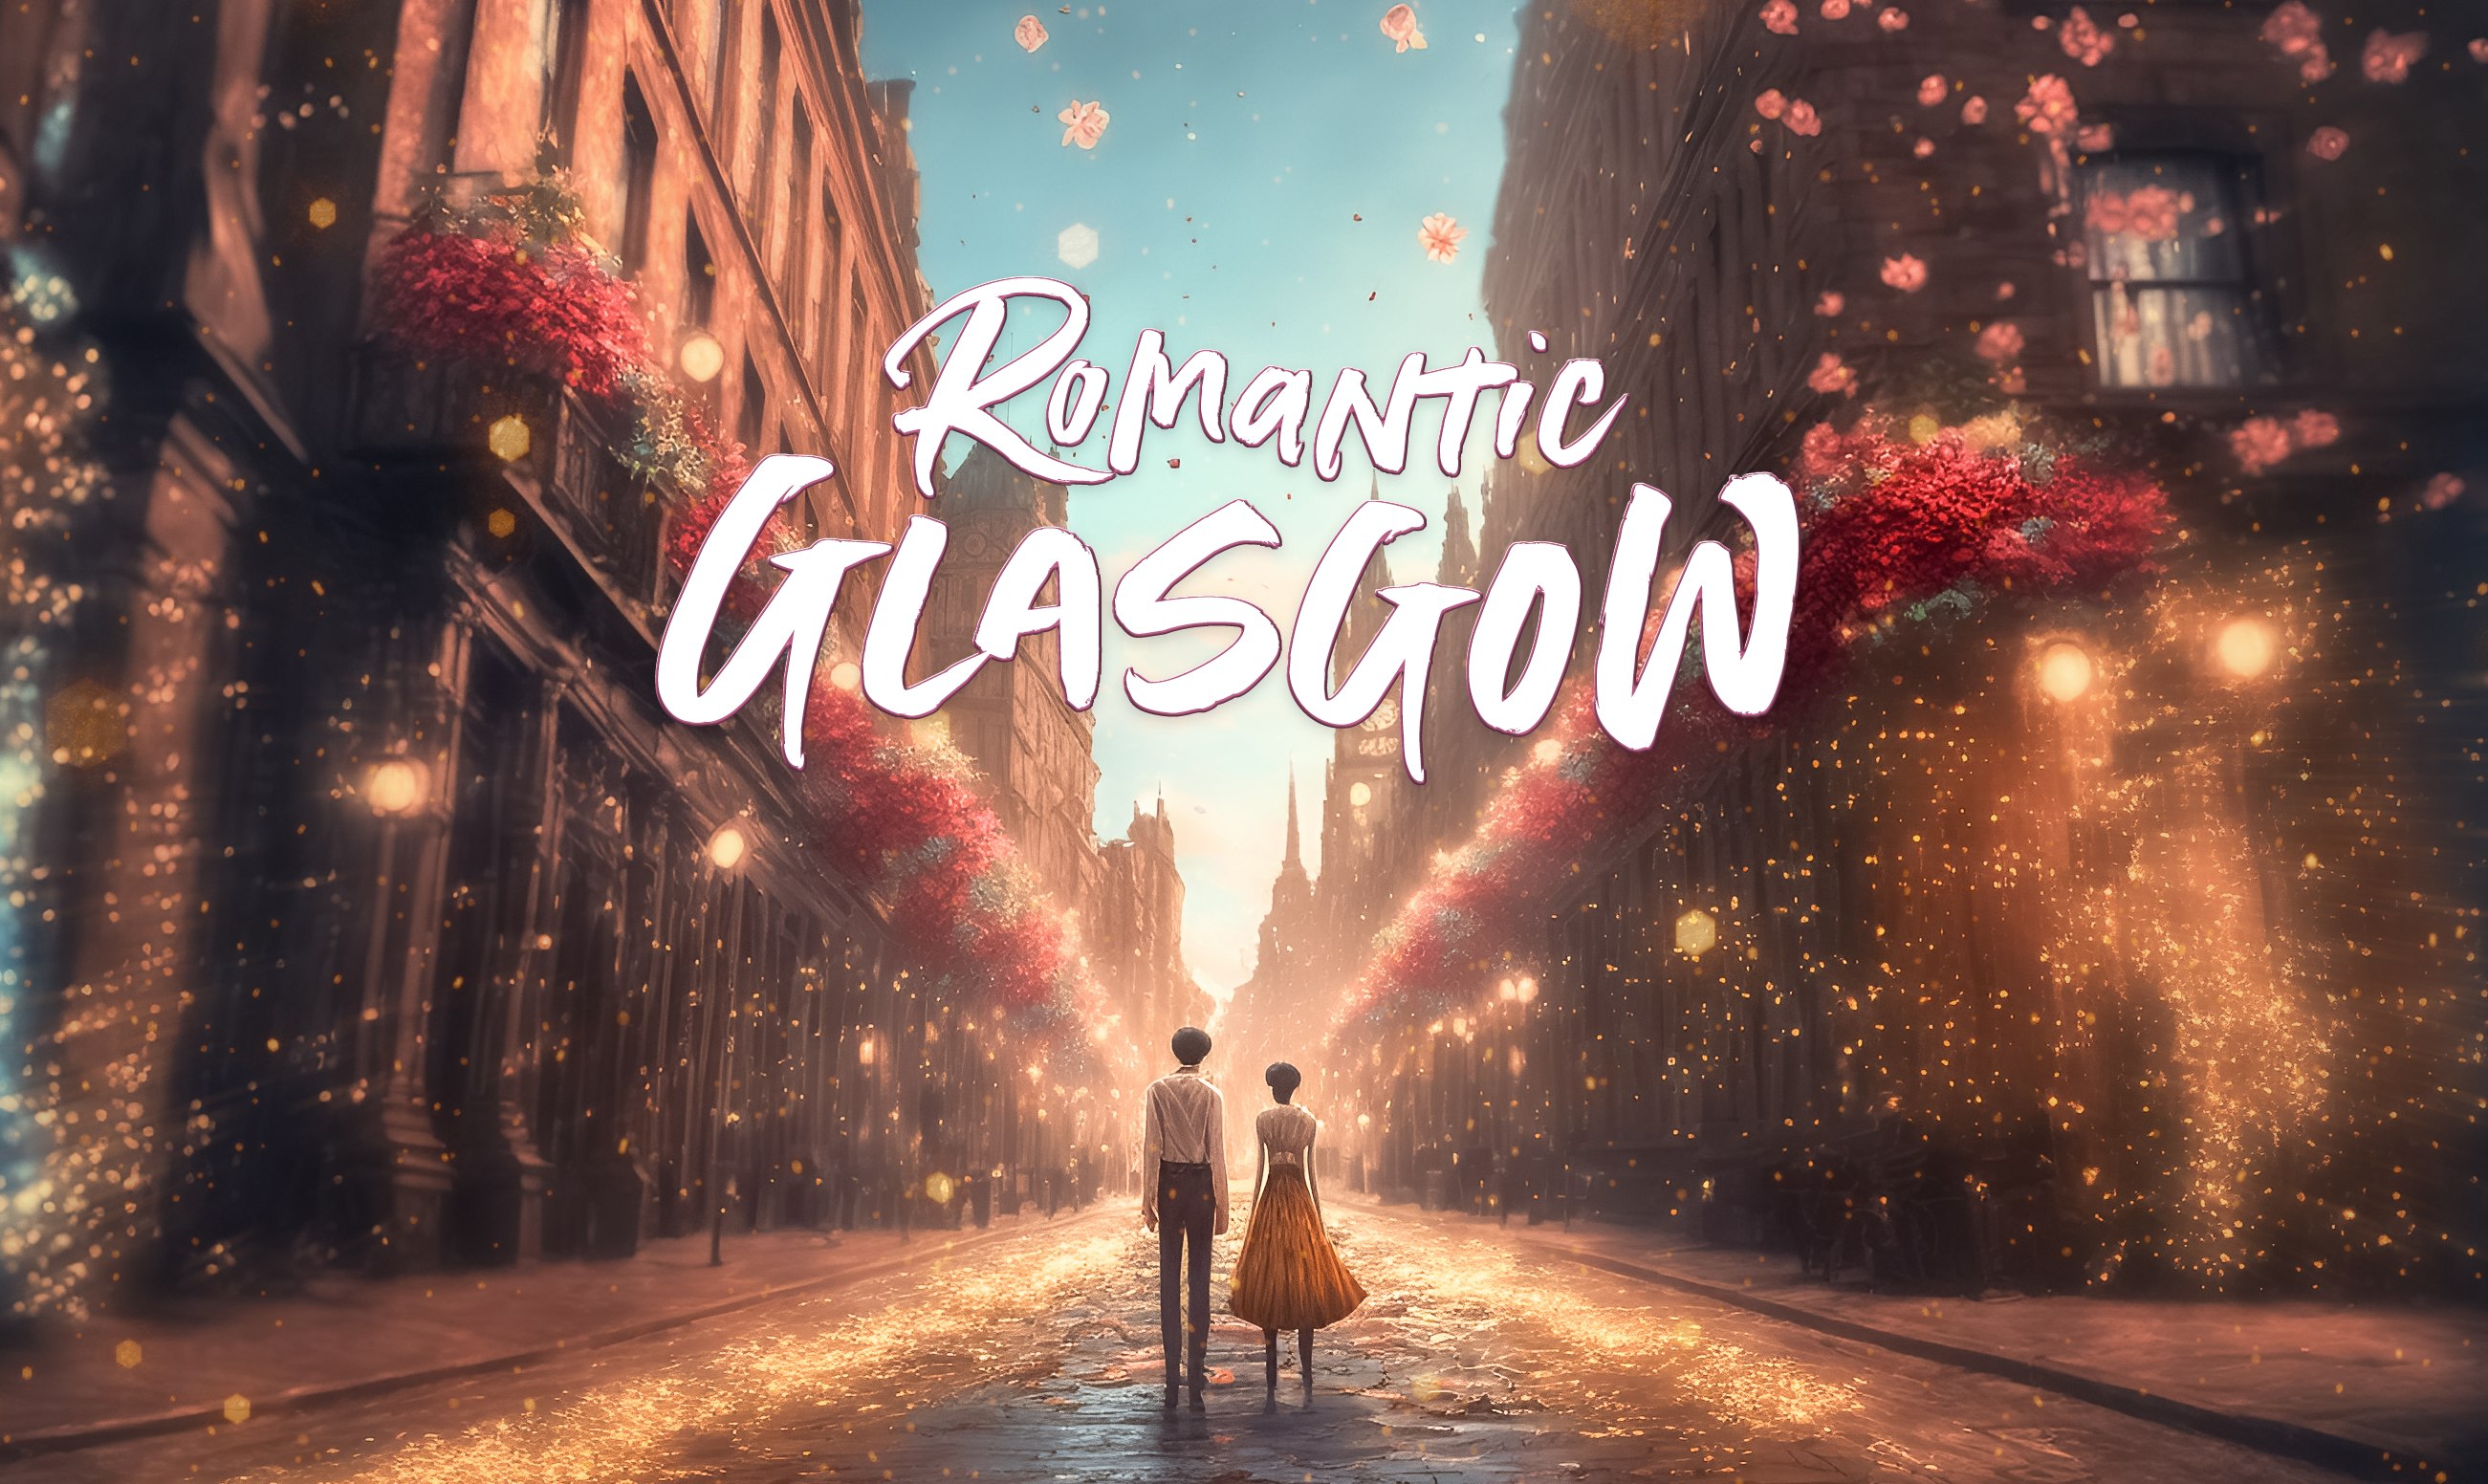 Romantic Glasgow: The Last First Date